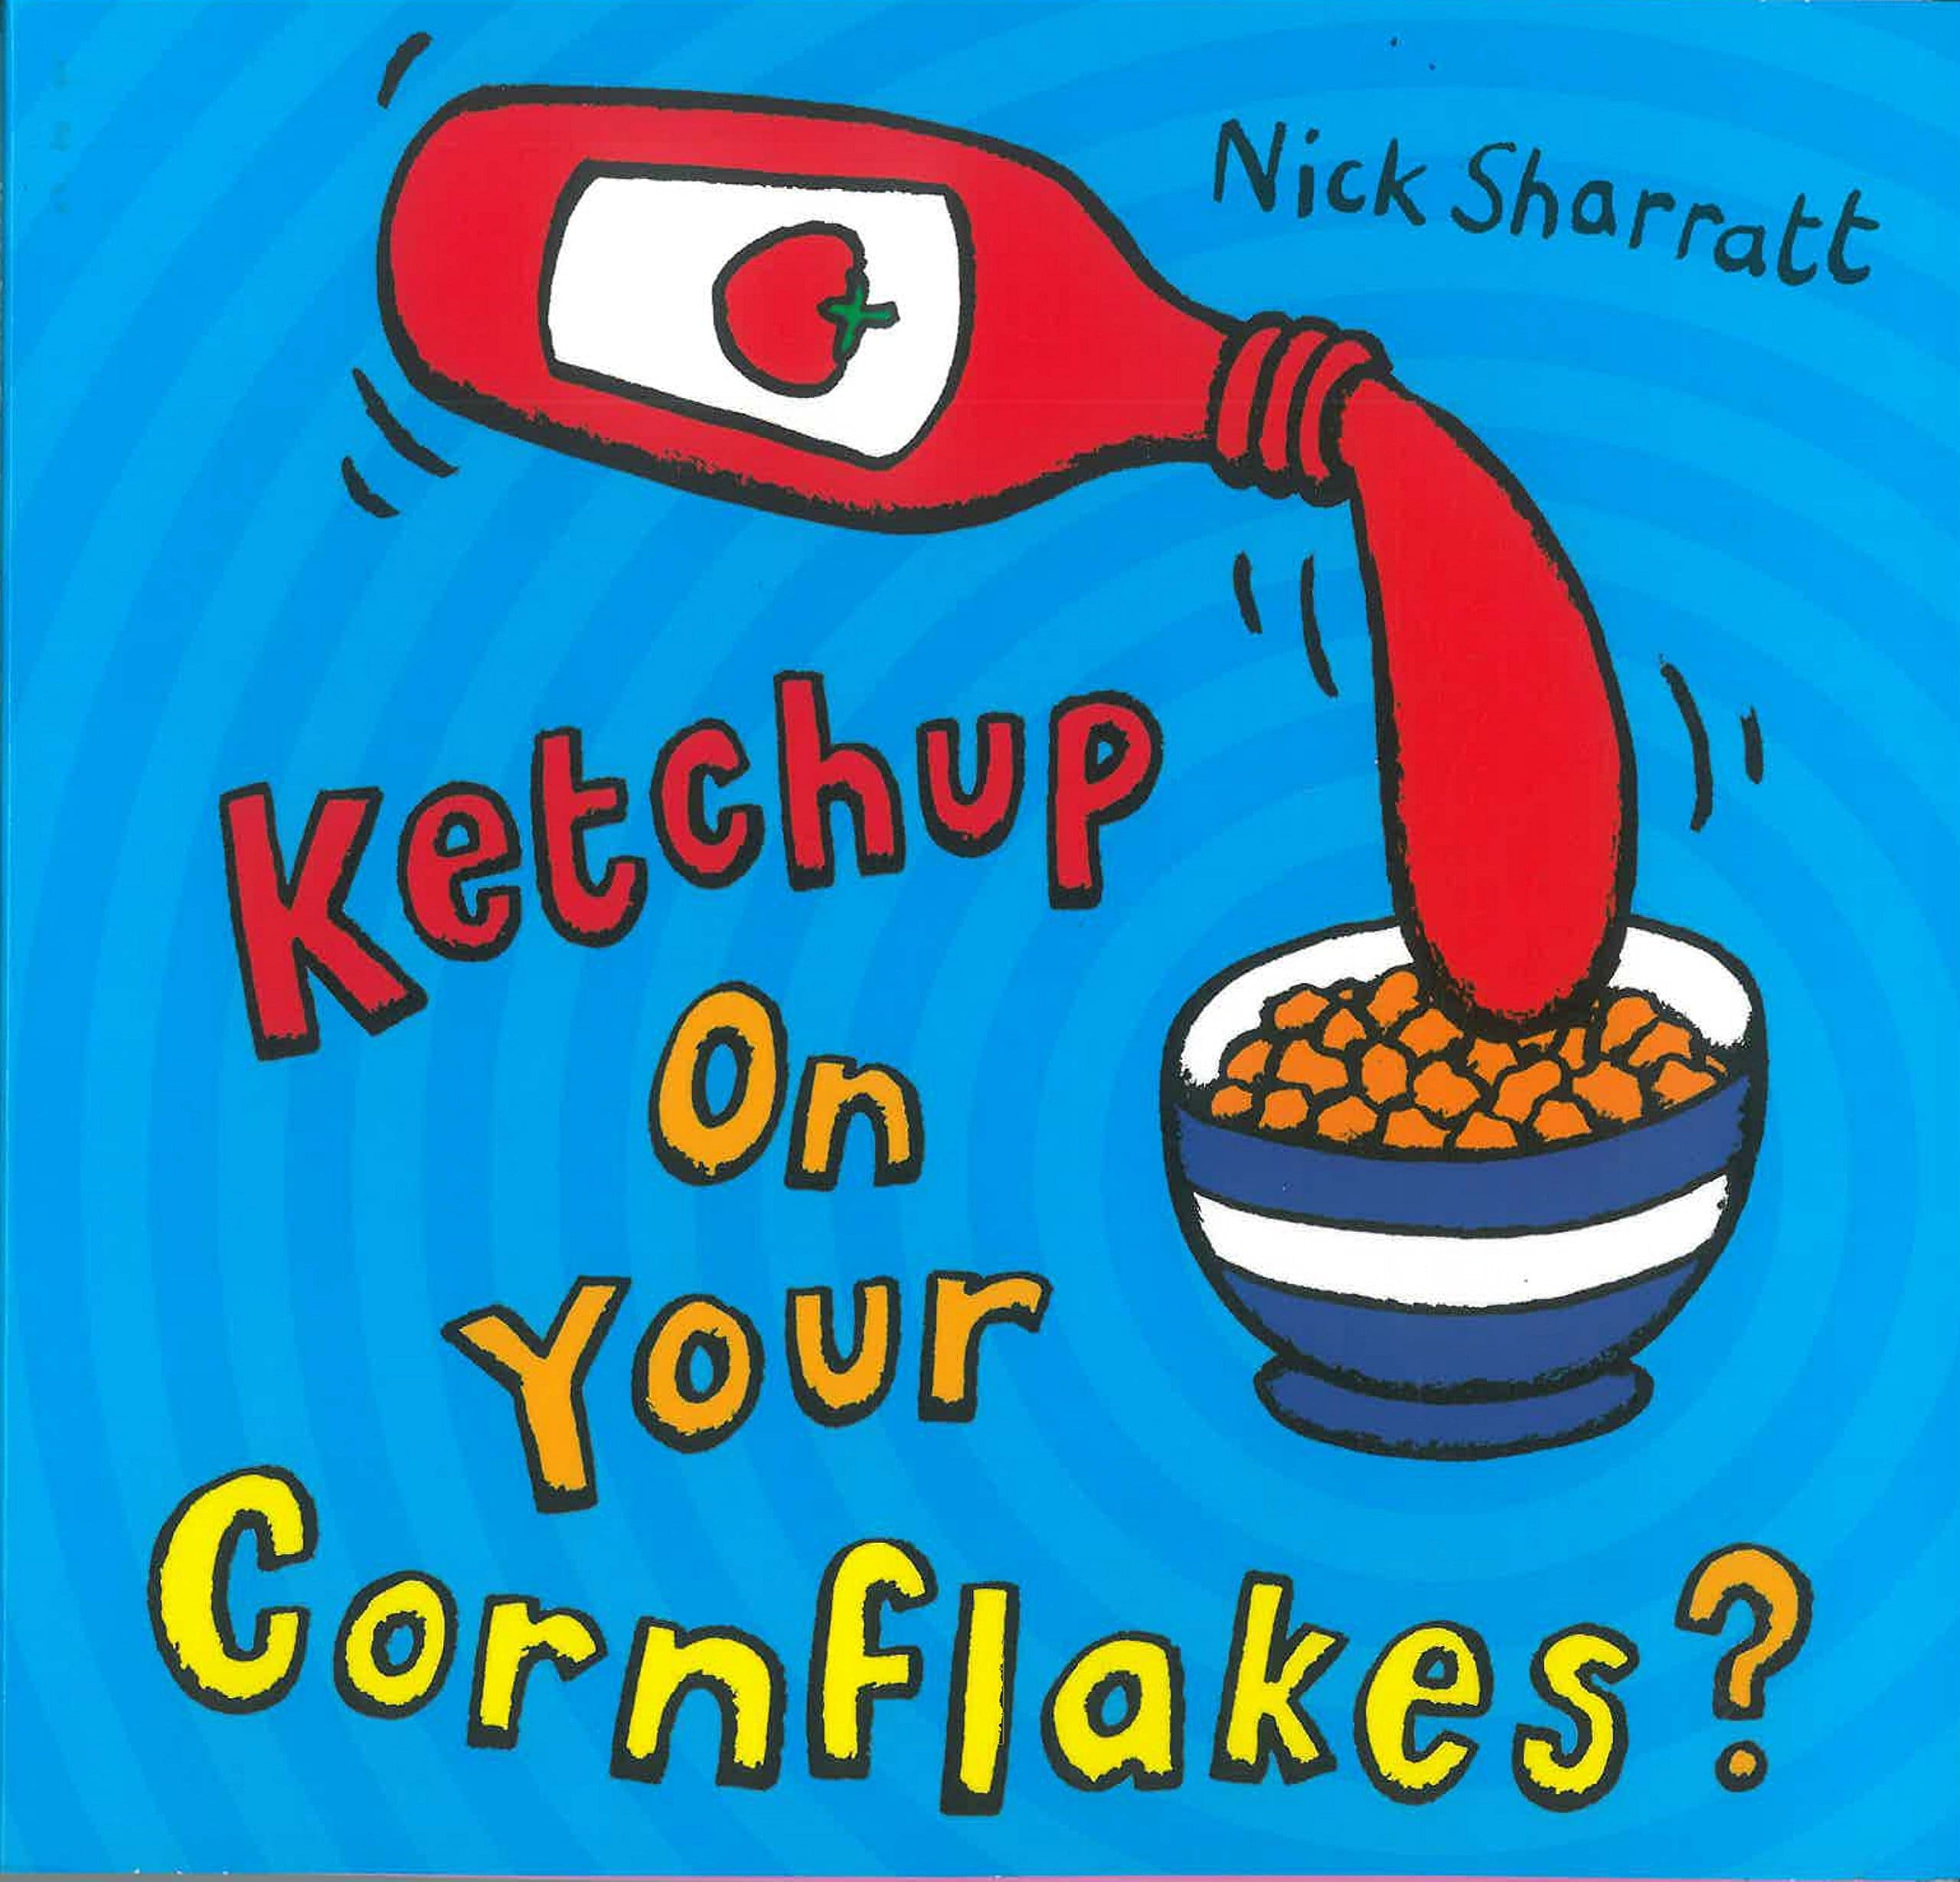 IMG : Ketchup on Your Cornflakes?